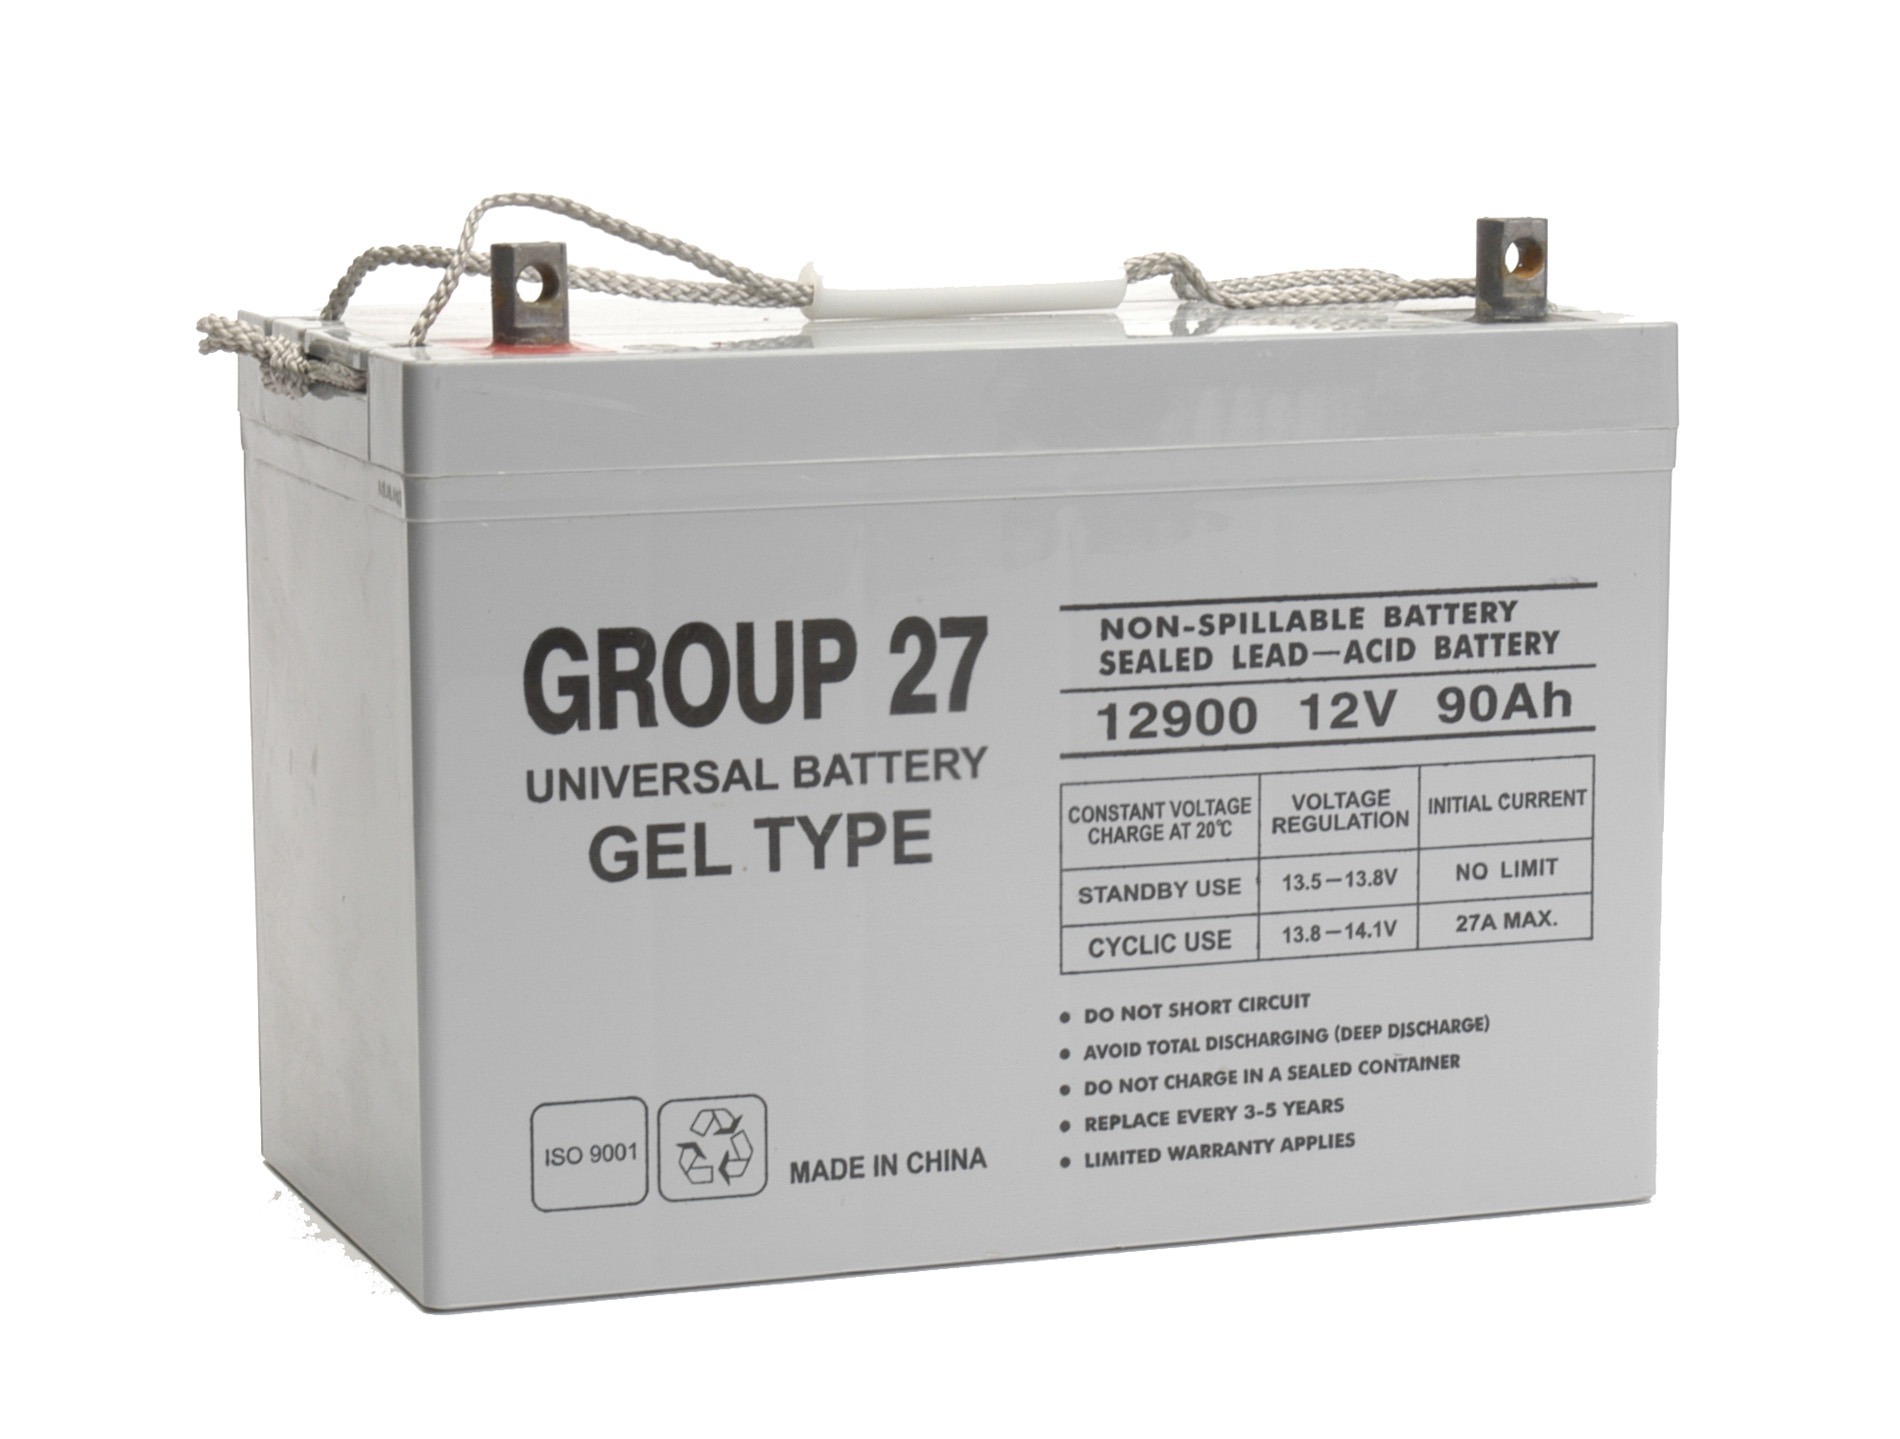 UB12900 (Group 27) 12v 90ah GEL Type Battery Replacement for Trojan T27-GEL